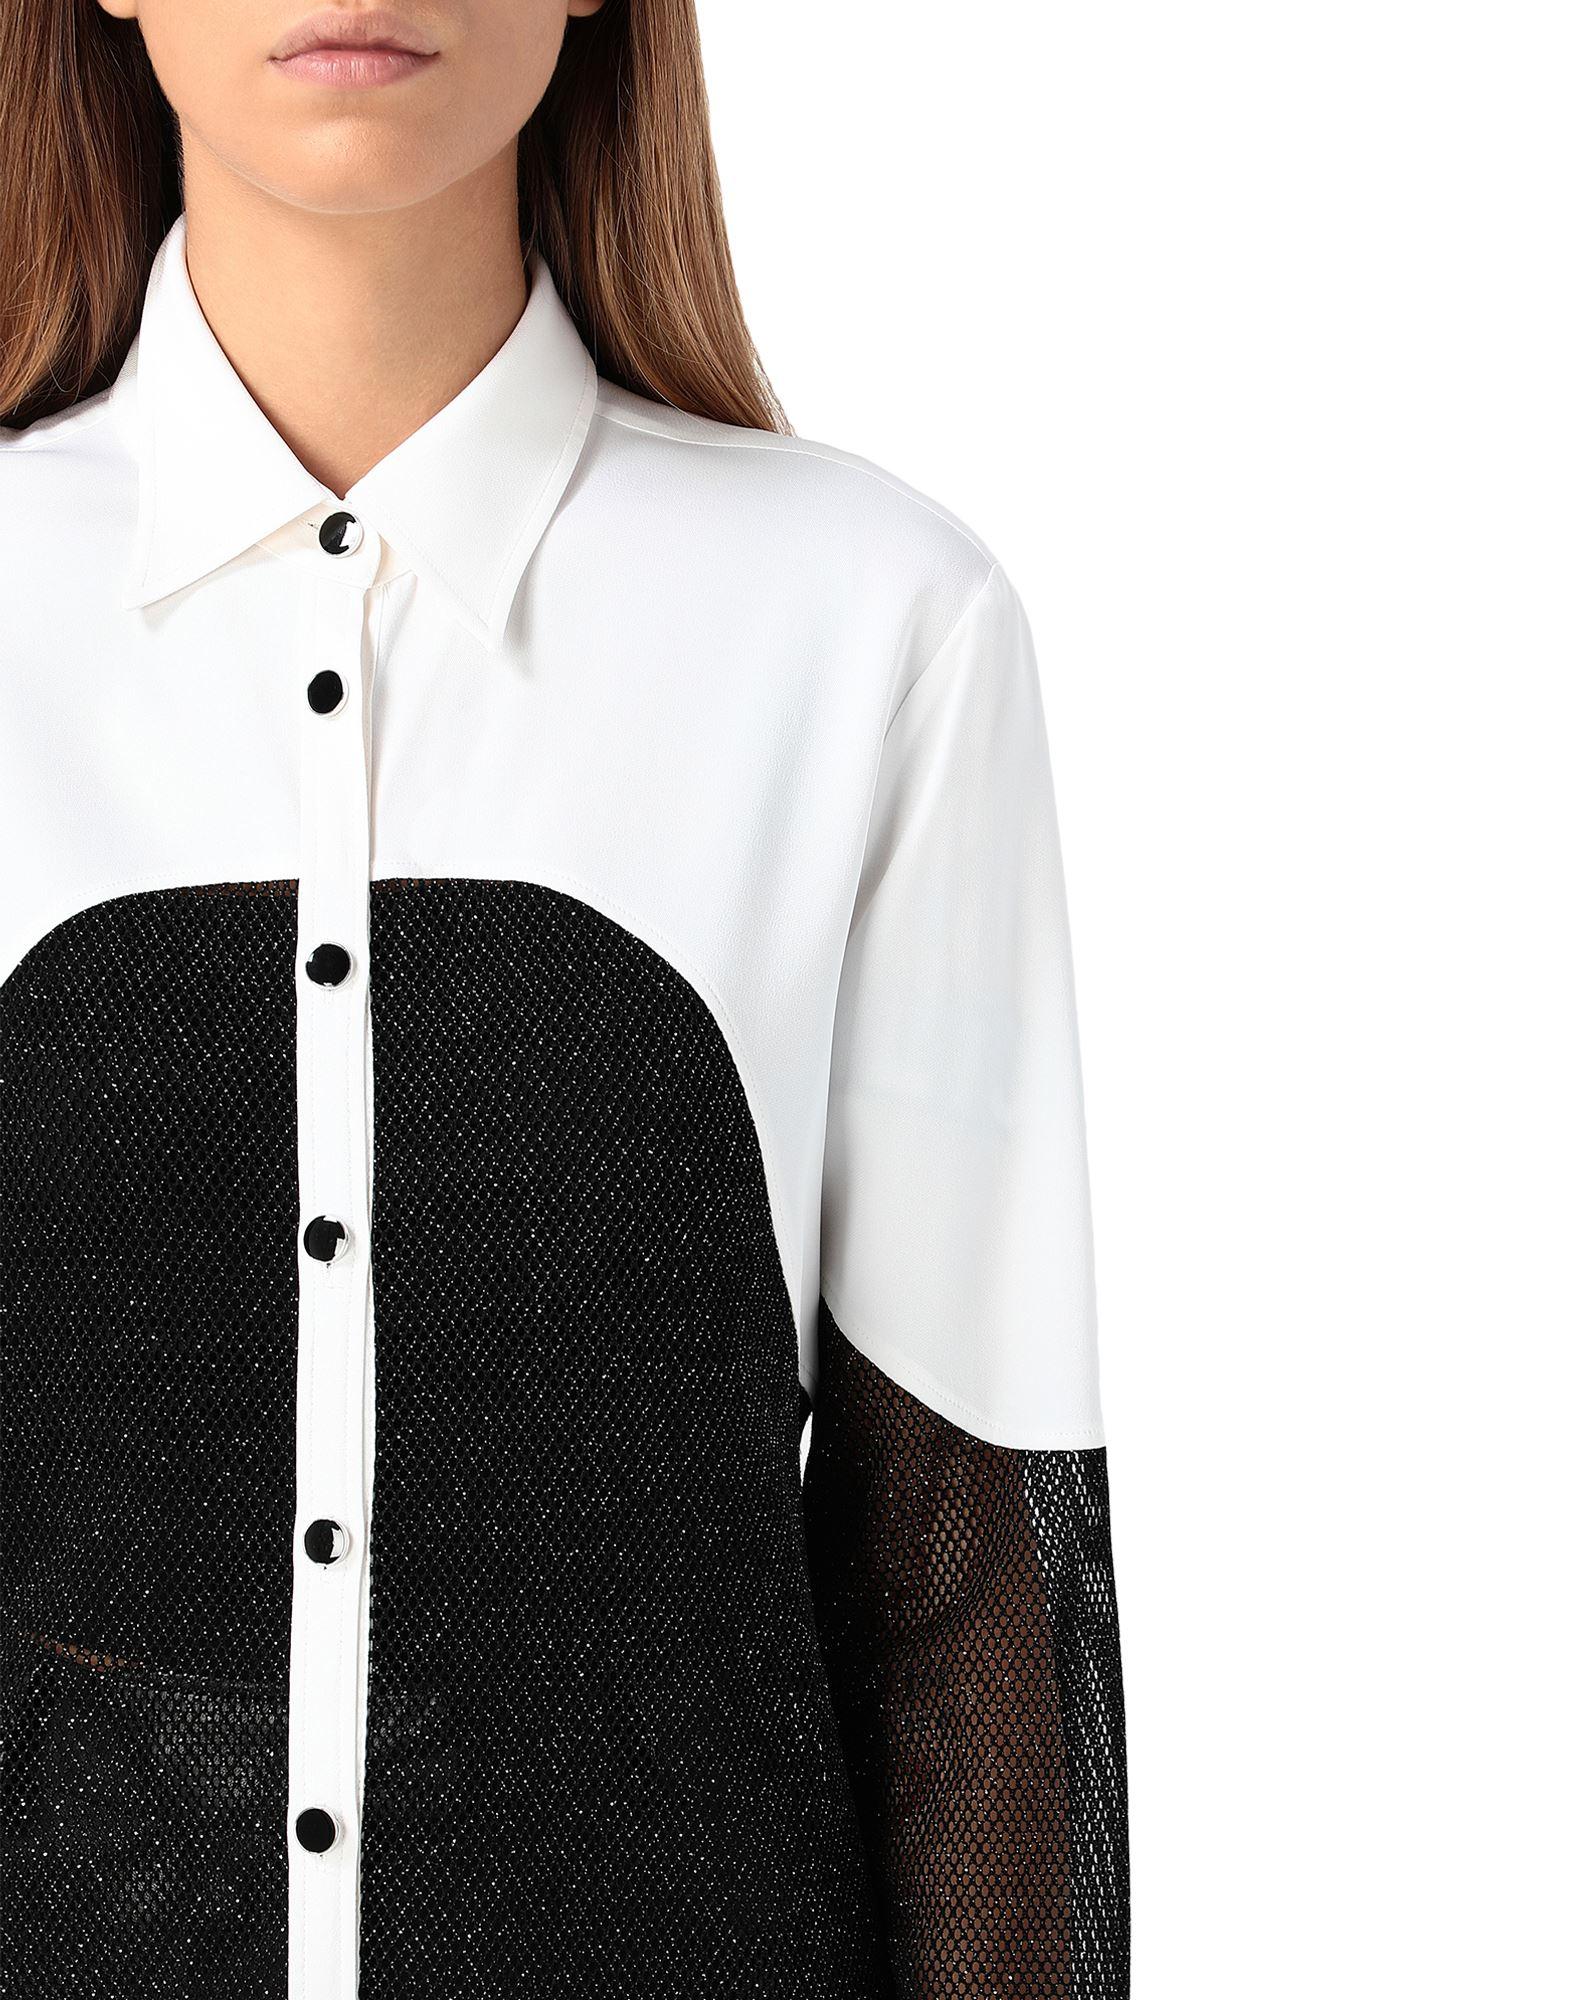 Just Cavalli Synthetic Shirt in White - Lyst